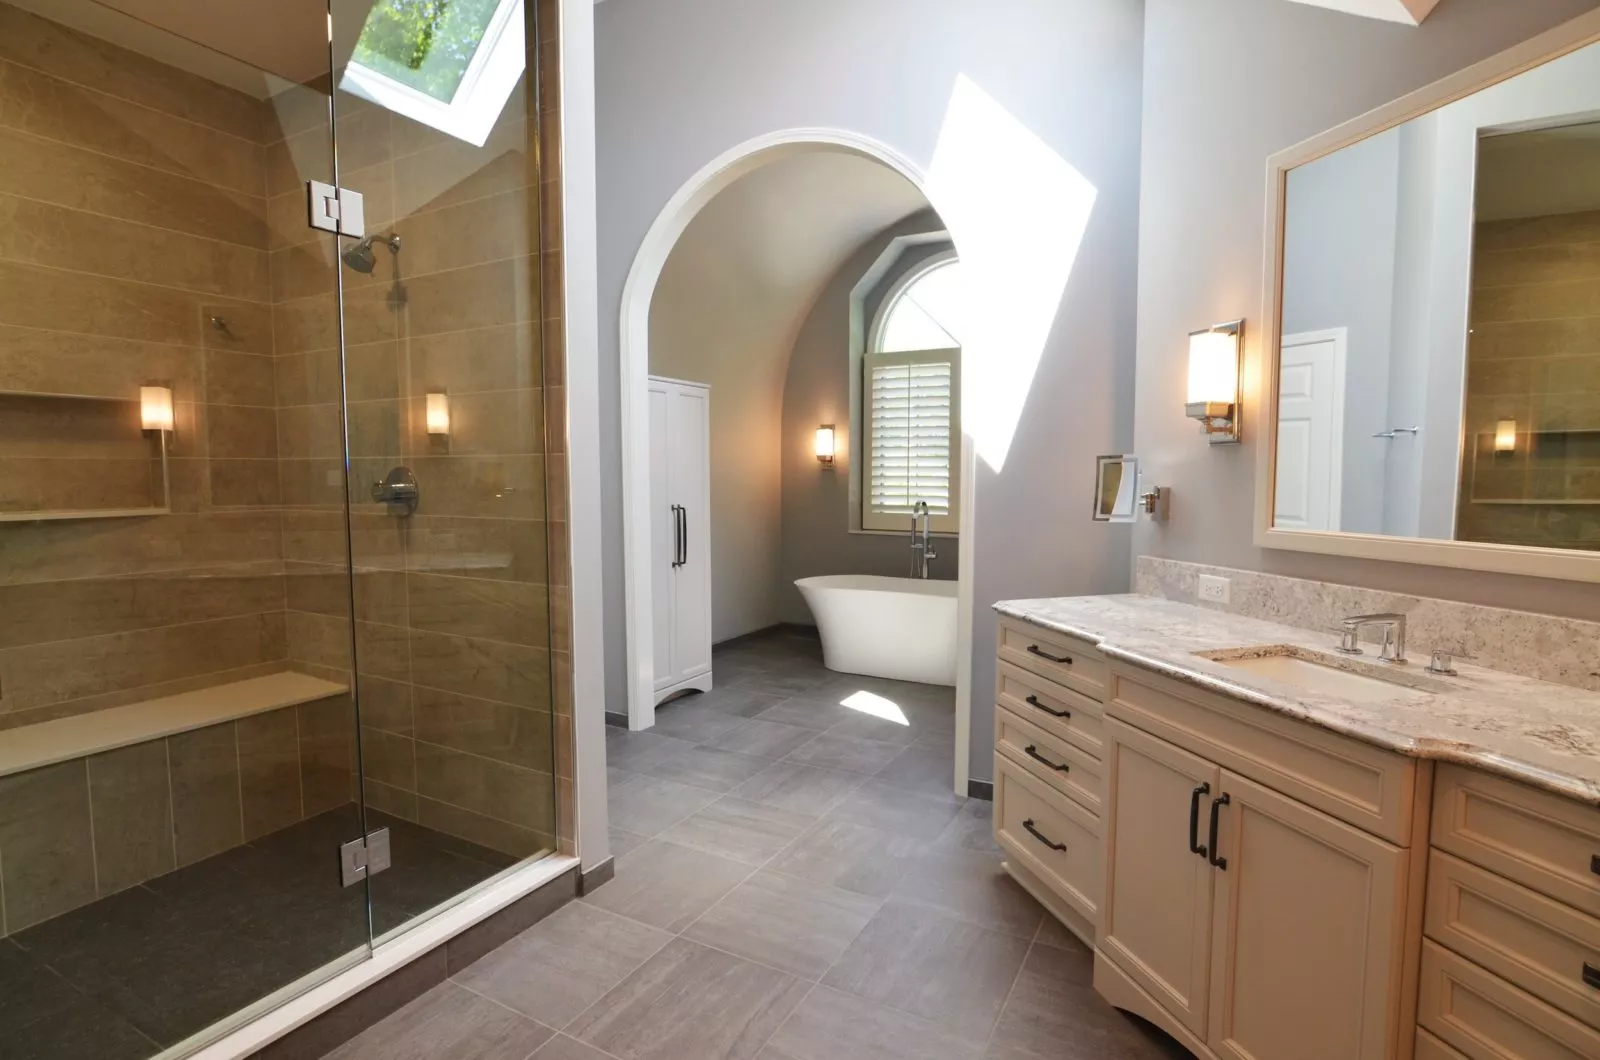 Two-room bathroom with shower, sink with mirror, and free-standing bathtub